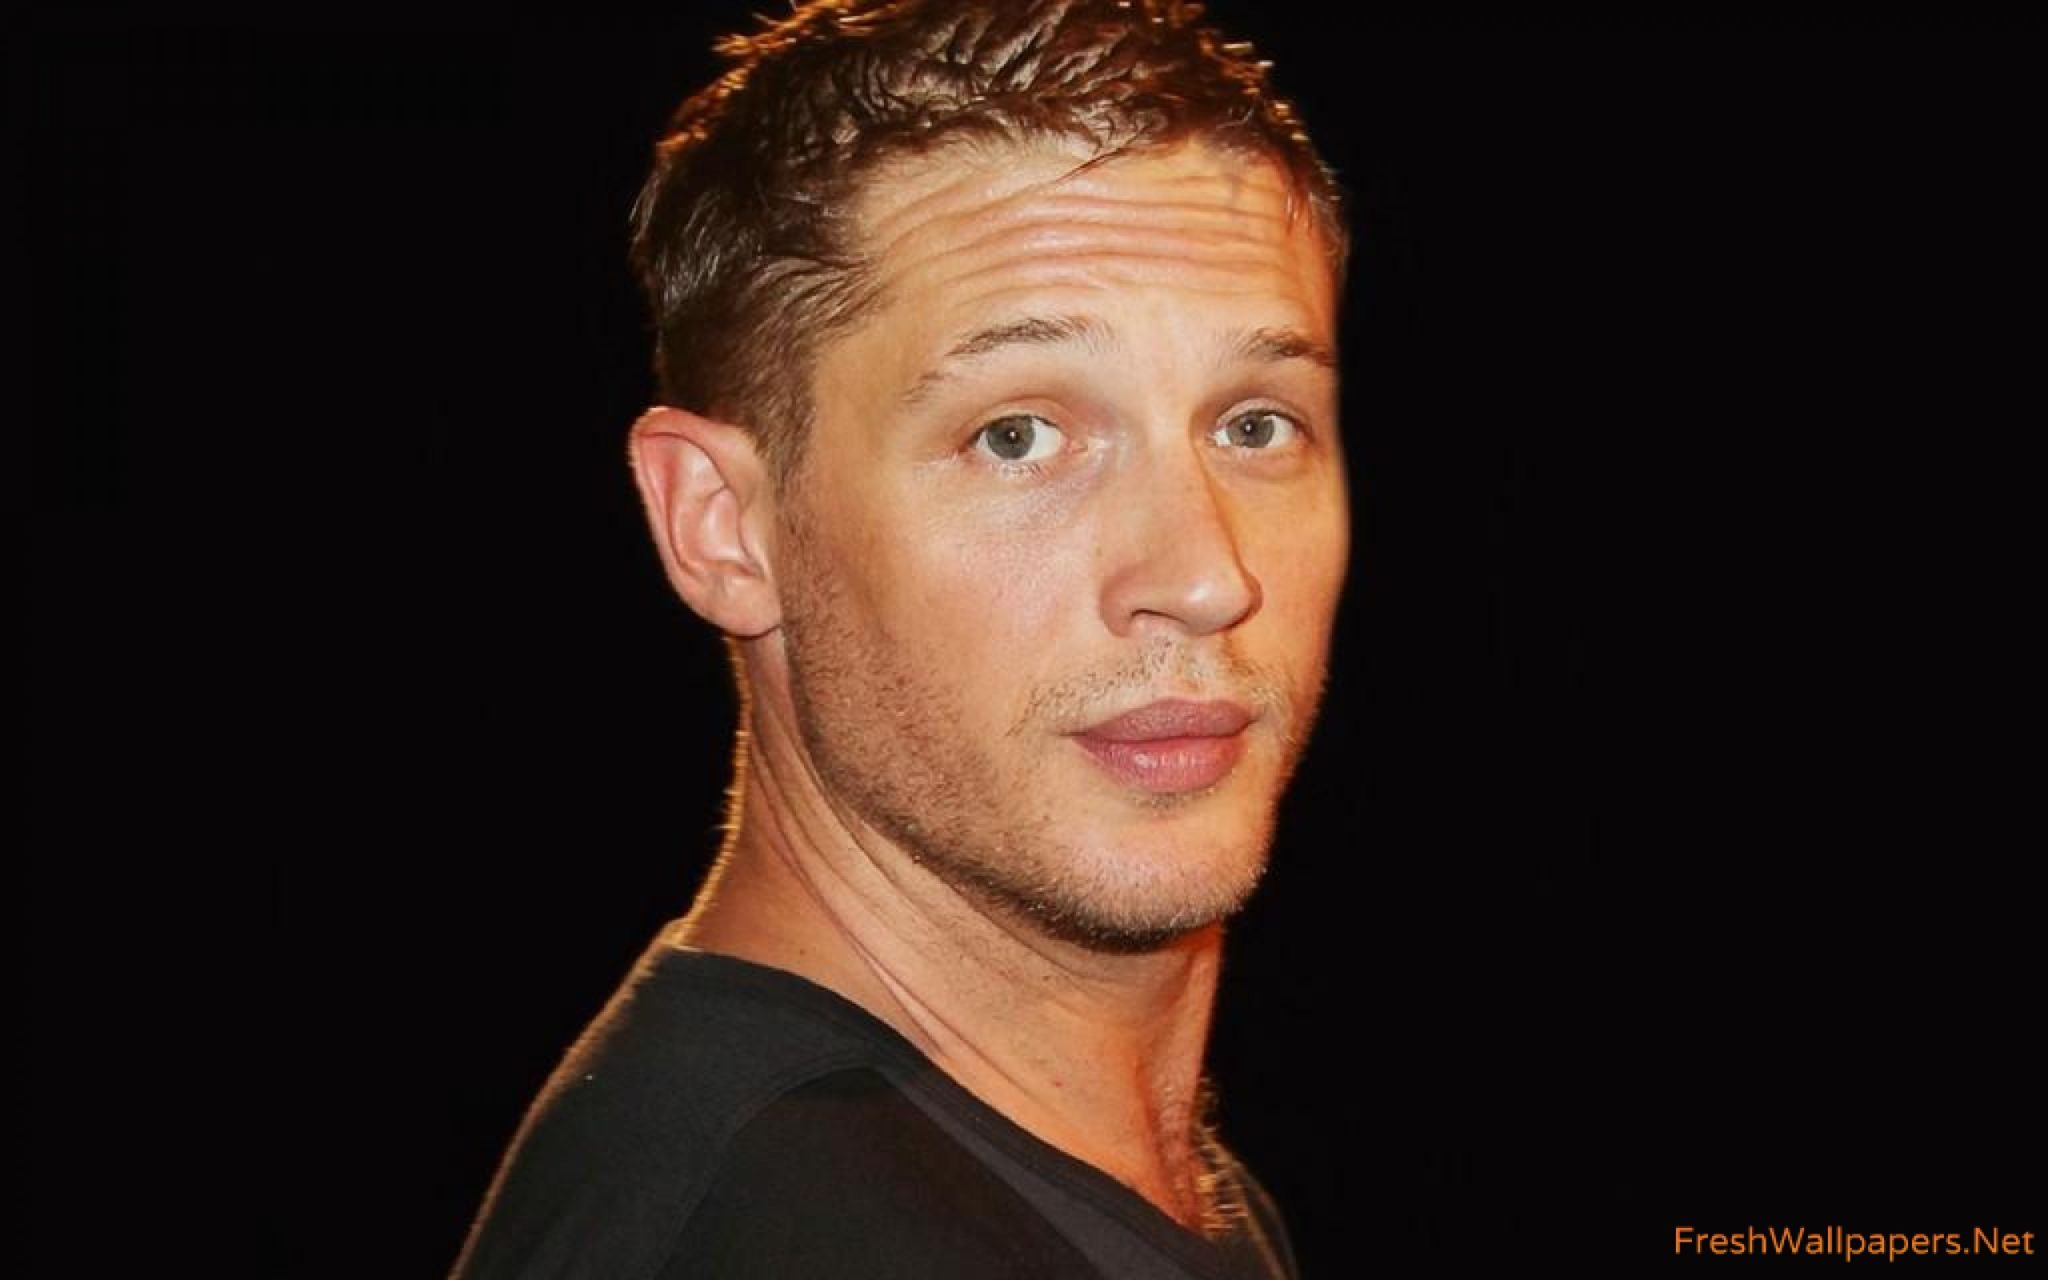 What is net worth of Tom Hardy?